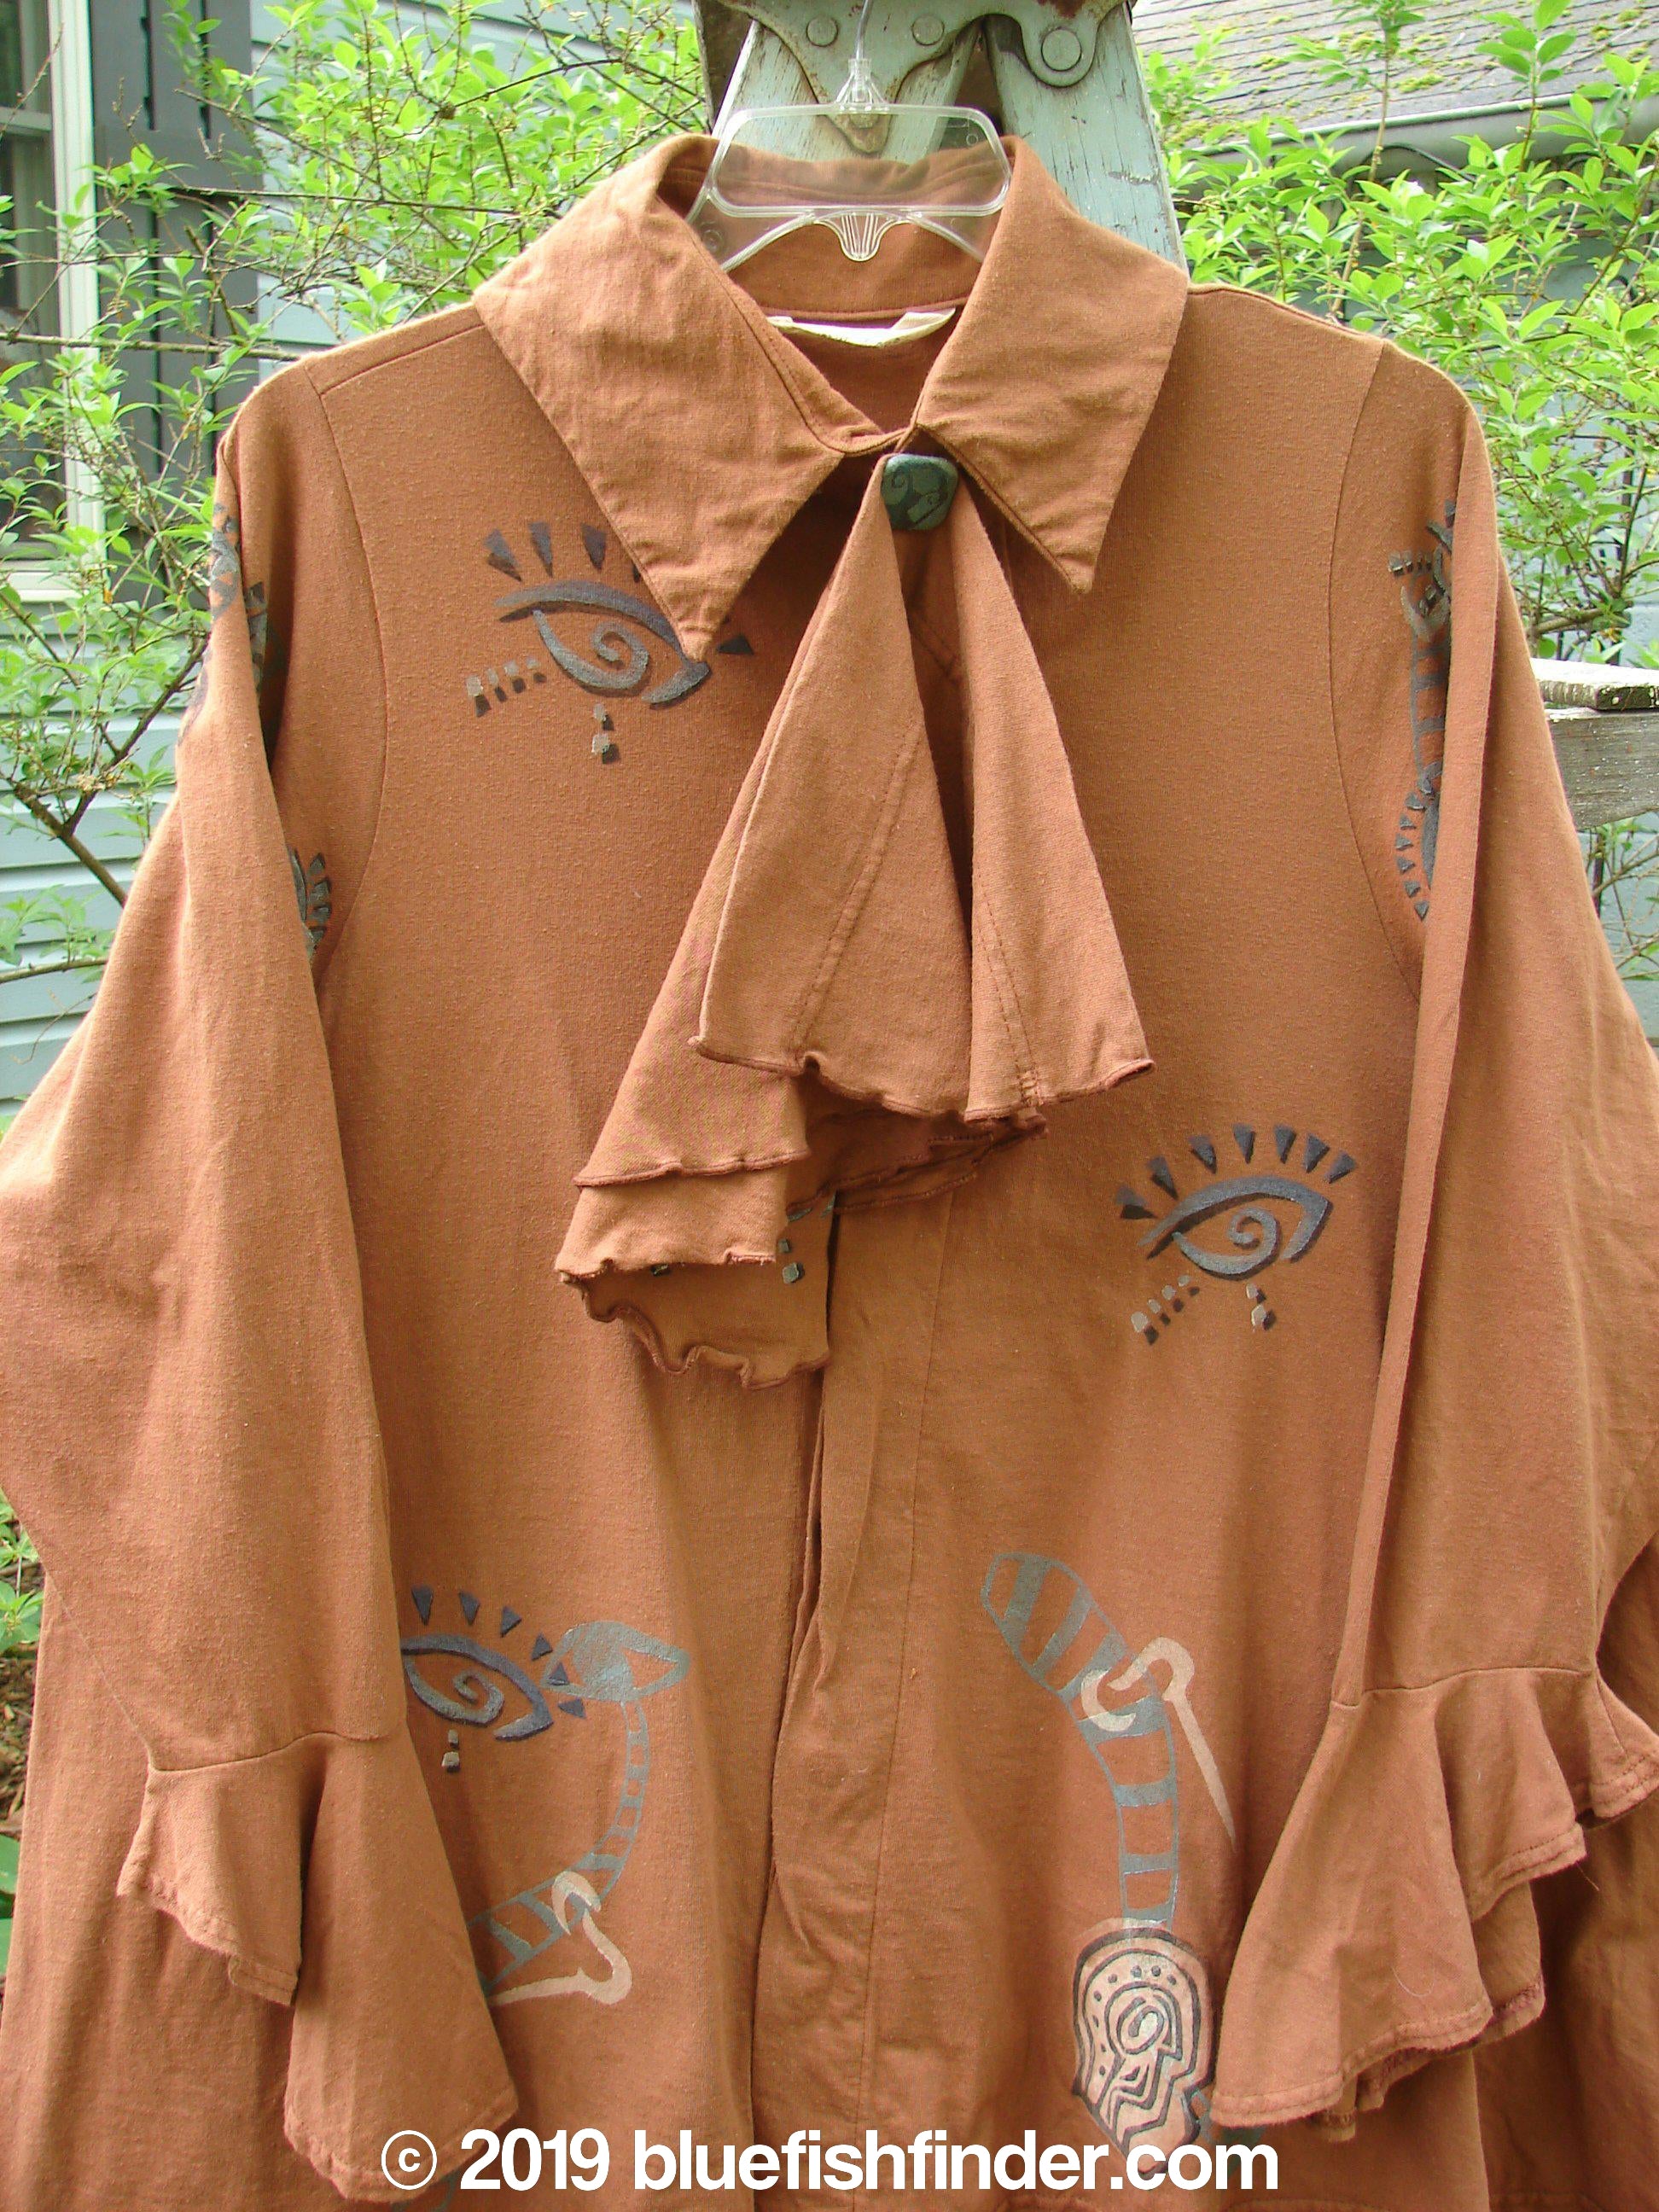 1996 Flutter Jacket Abstract Cassia Size 2: Brown jacket with a large bow, hidden button front, and triangular removable flounce. Features flutter sleeves, ruffled rear hemline, and generous hip measurements. Made from organic cotton.